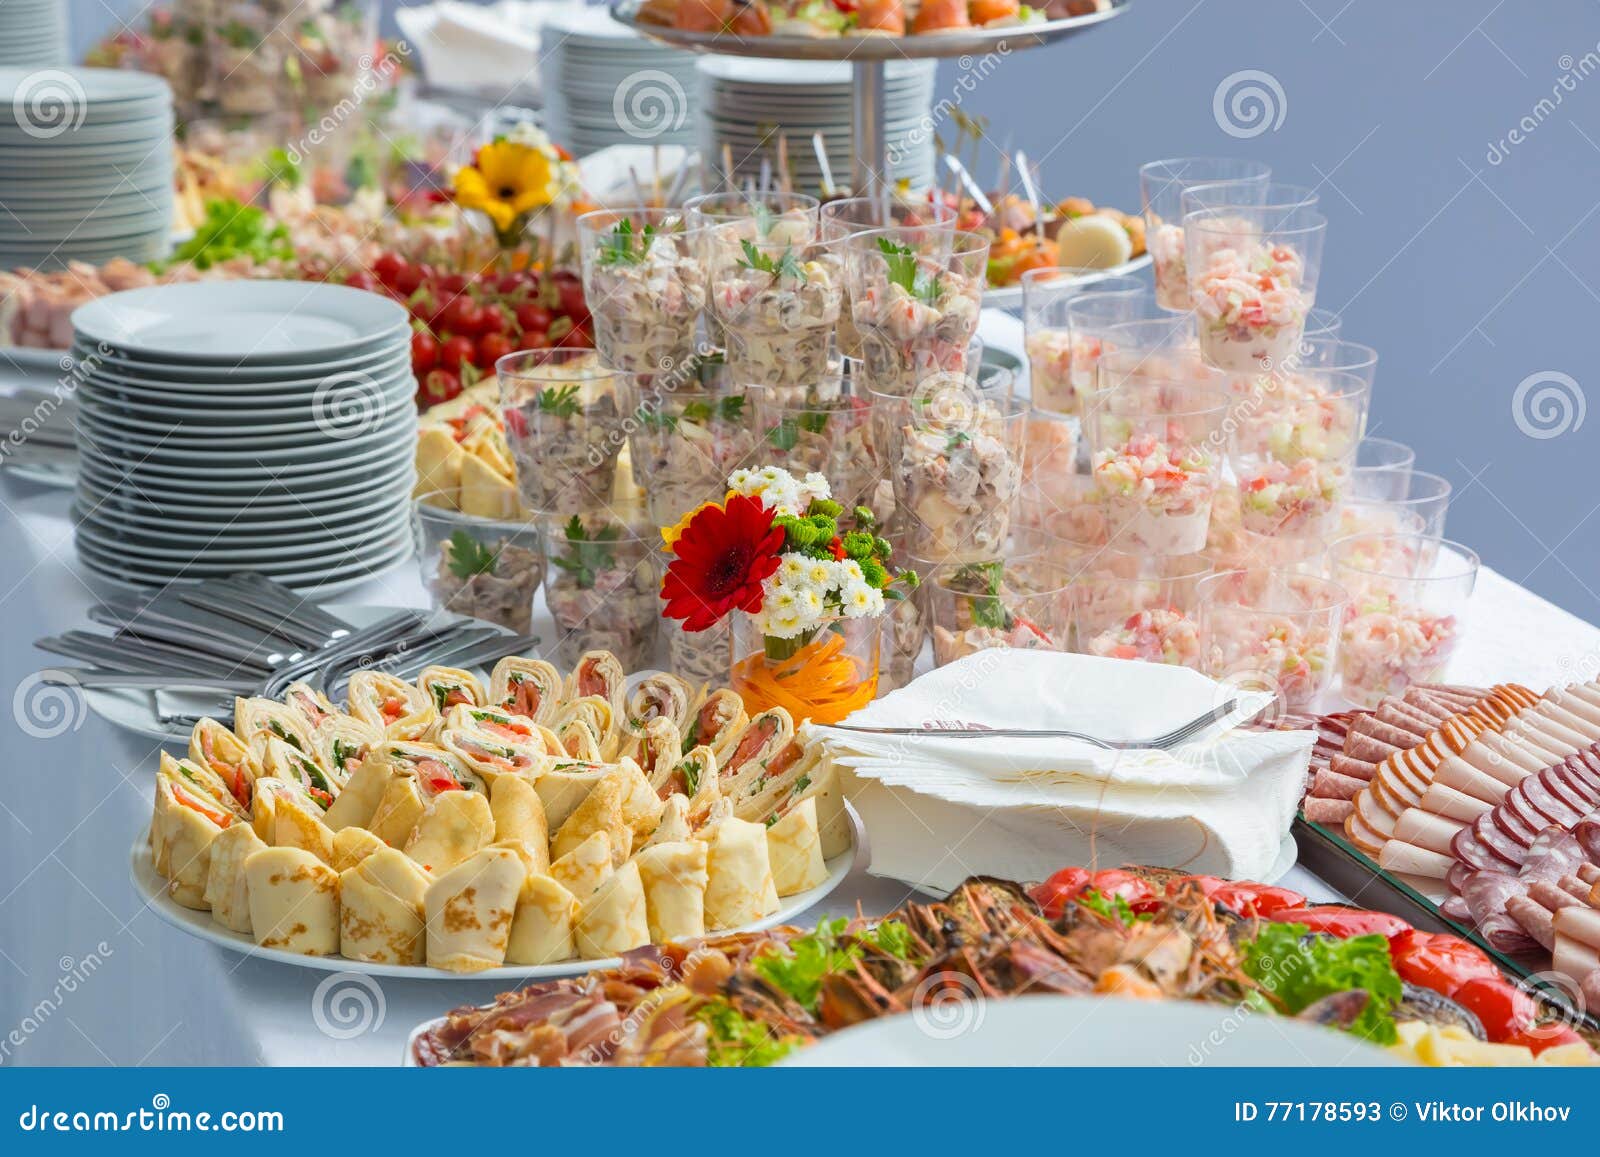 Buffet Di Natale Foto.86 552 Buffet Table Photos Free Royalty Free Stock Photos From Dreamstime